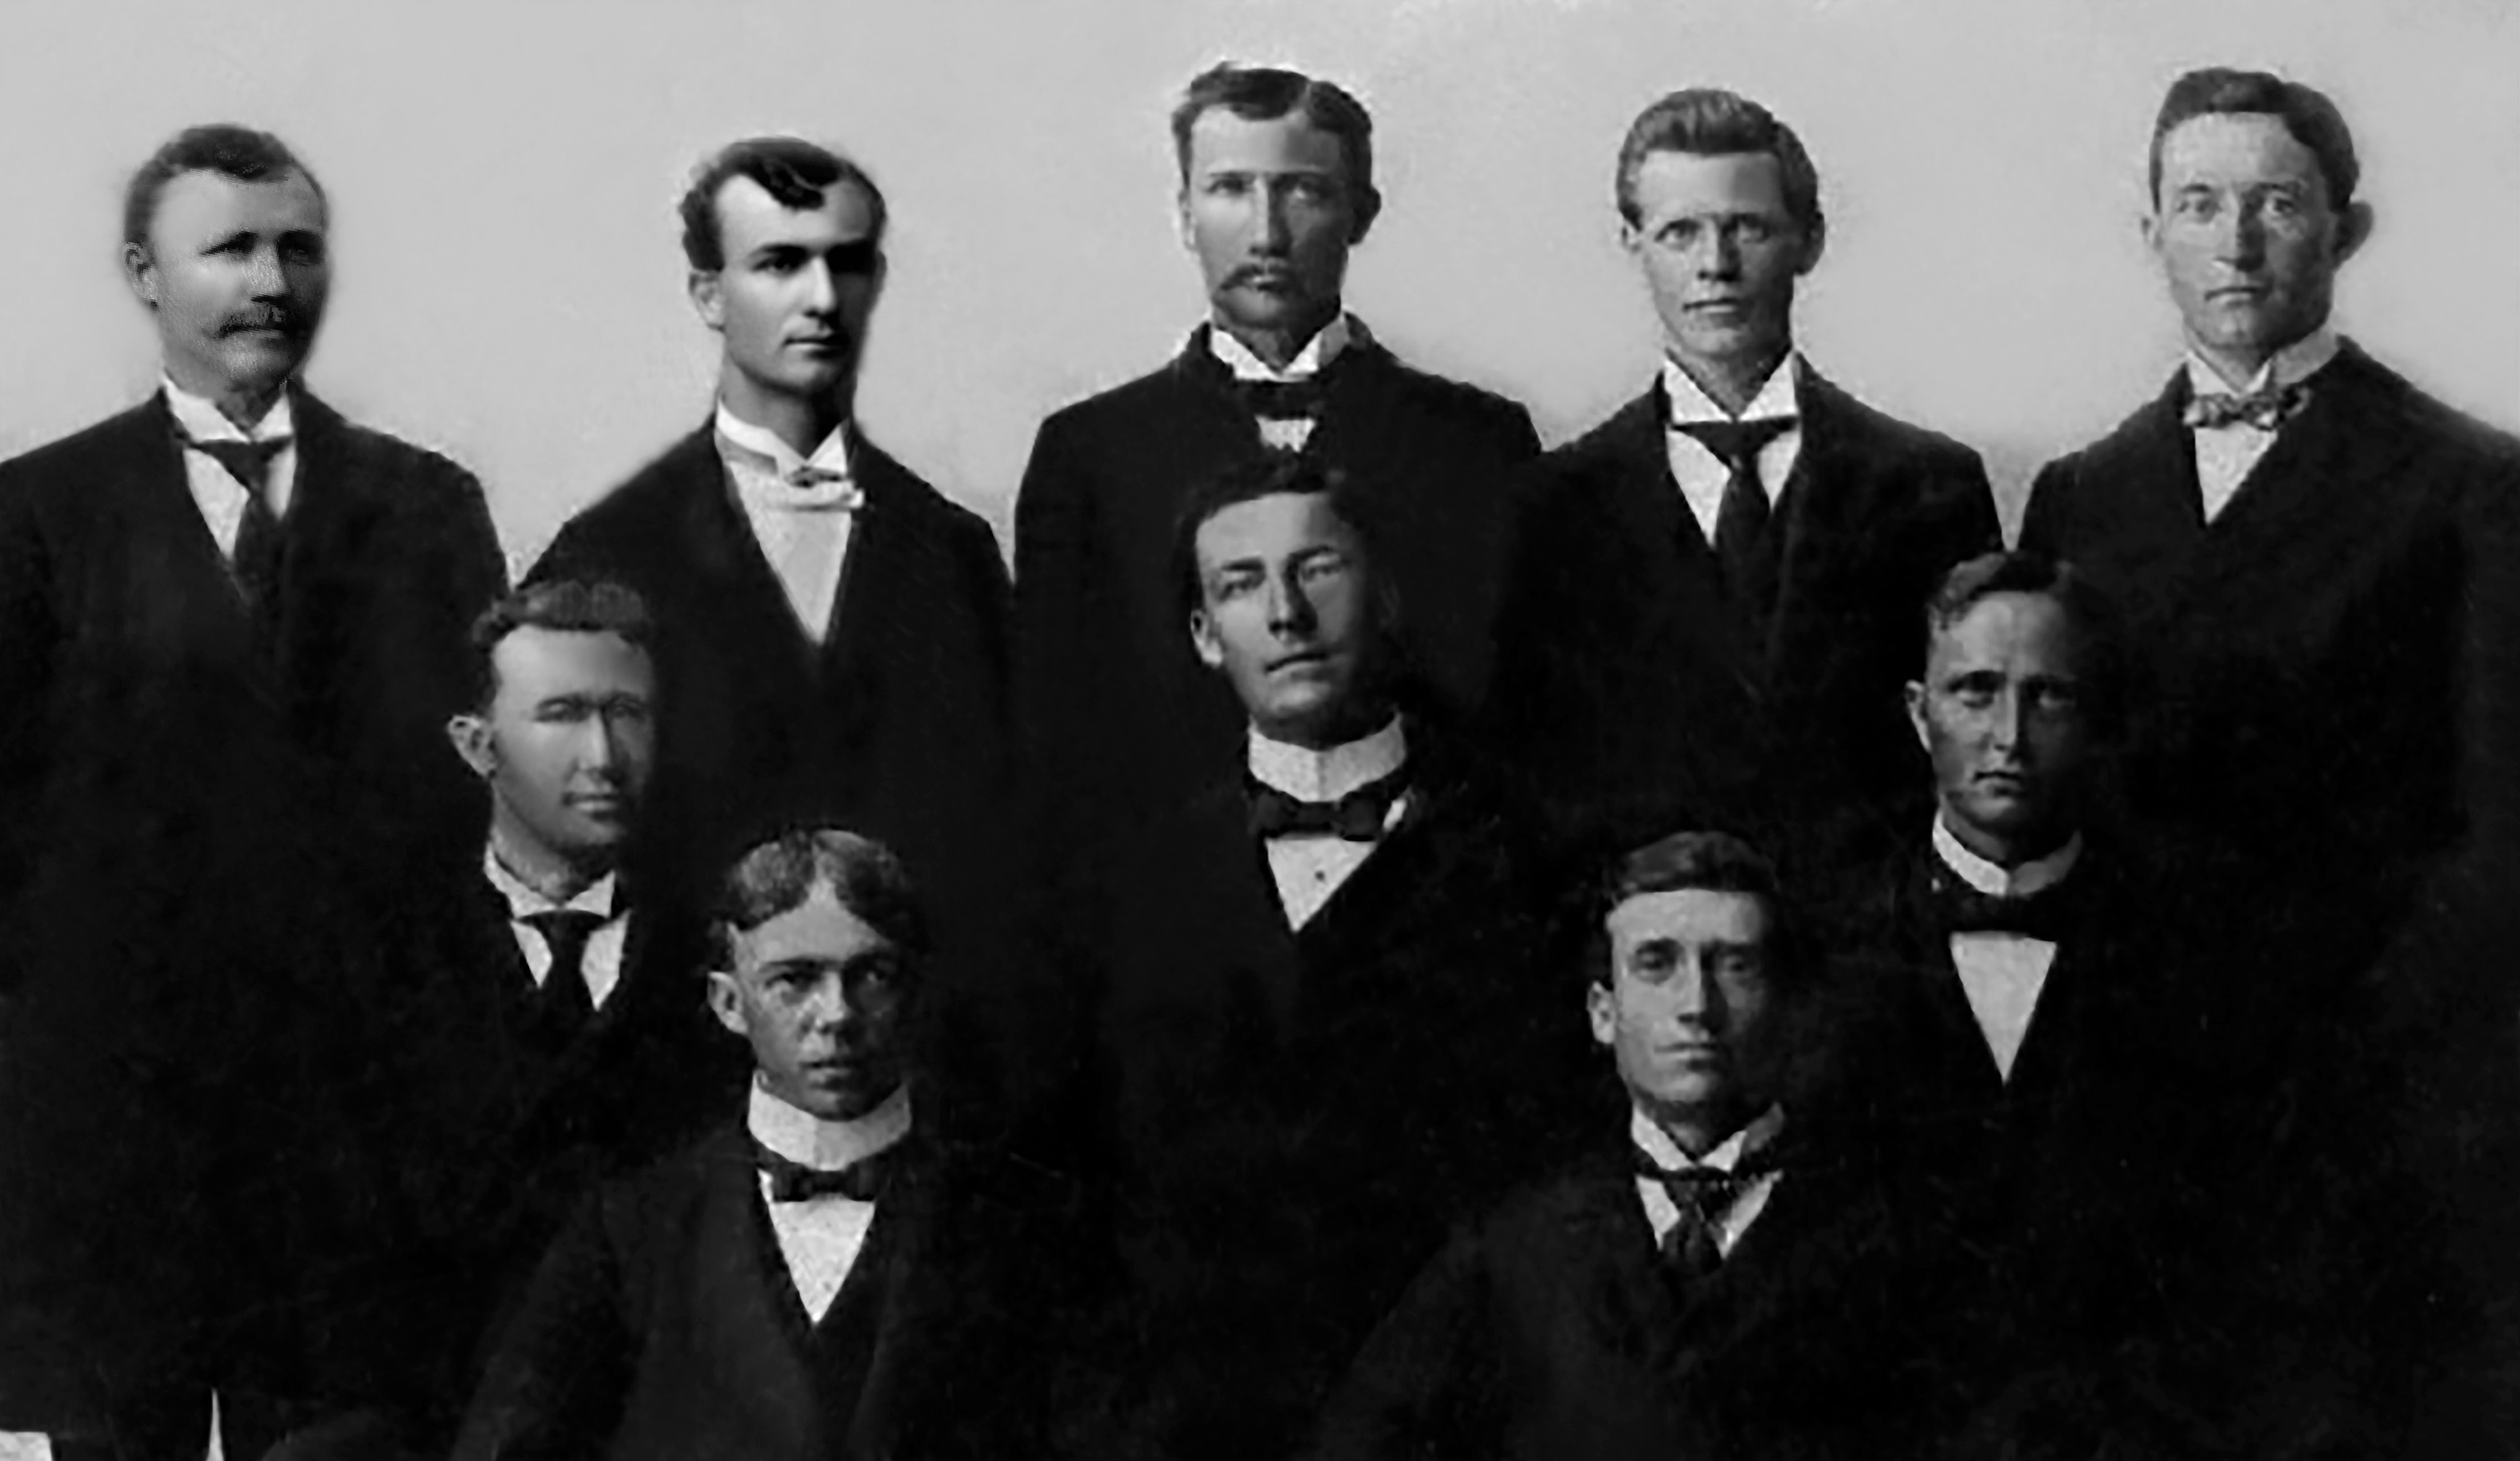 1899/3: Florida Conference - Southern States Mission (27 Mar 1899)